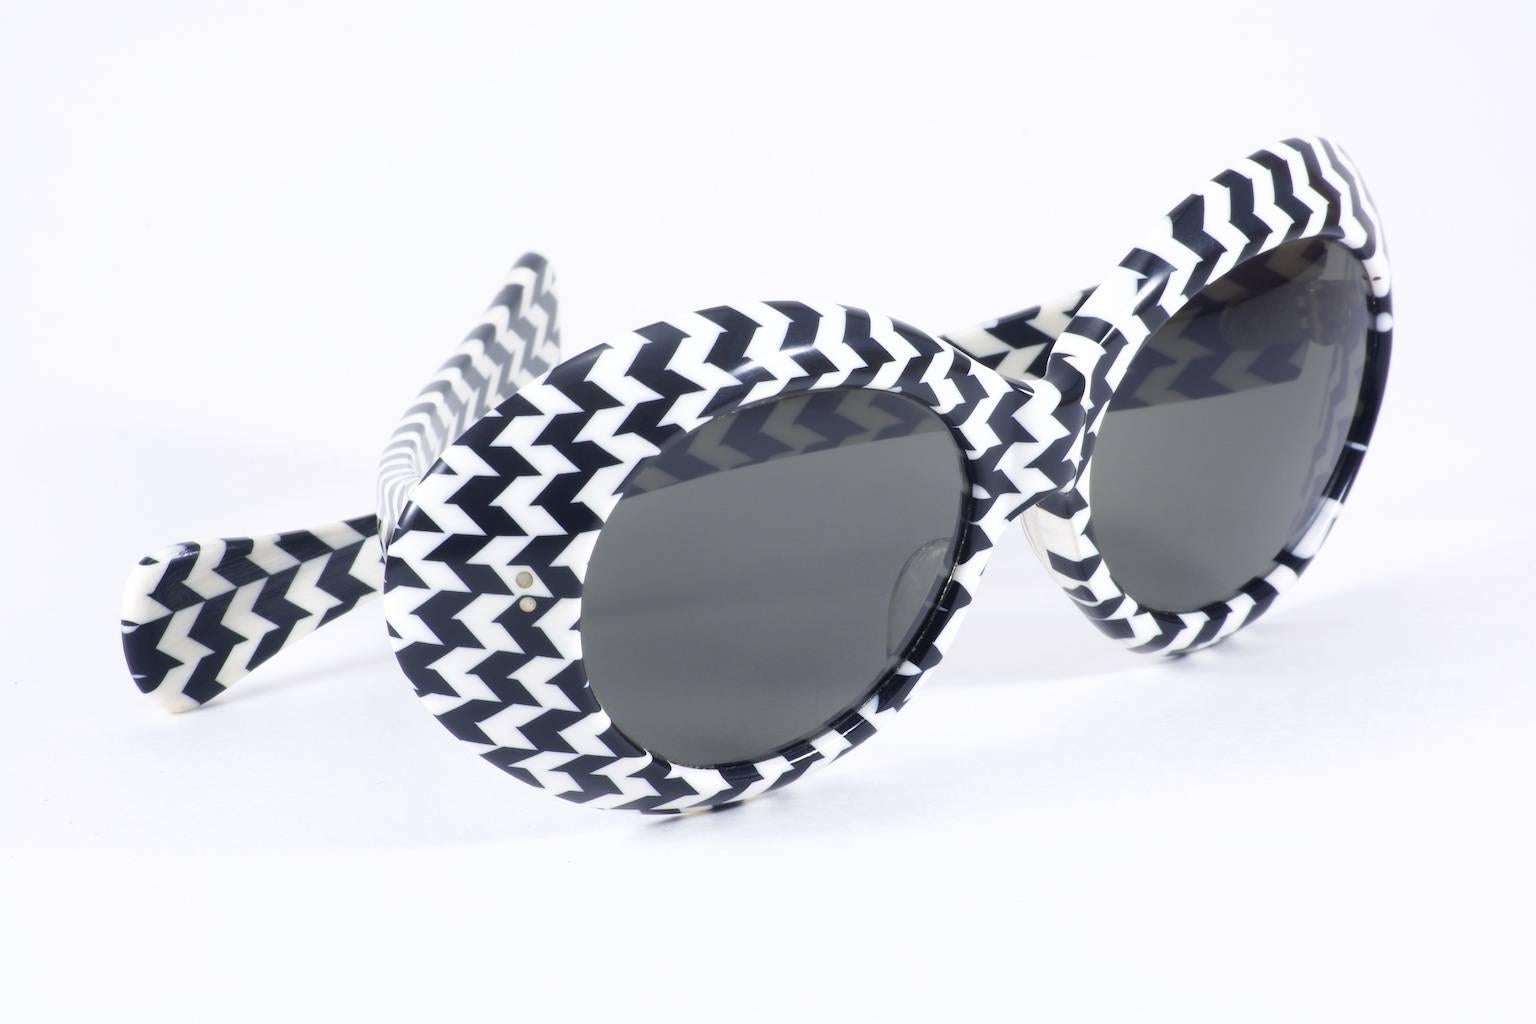 Big chunks of houndstooth in the form of a coat or dress is so 1950's.  The black and white pattern in small doses is all kinds of chic. Crazy-cool sporting the retro '50s style in the form of sunglasses.
Made in France

Coming from Hotel de